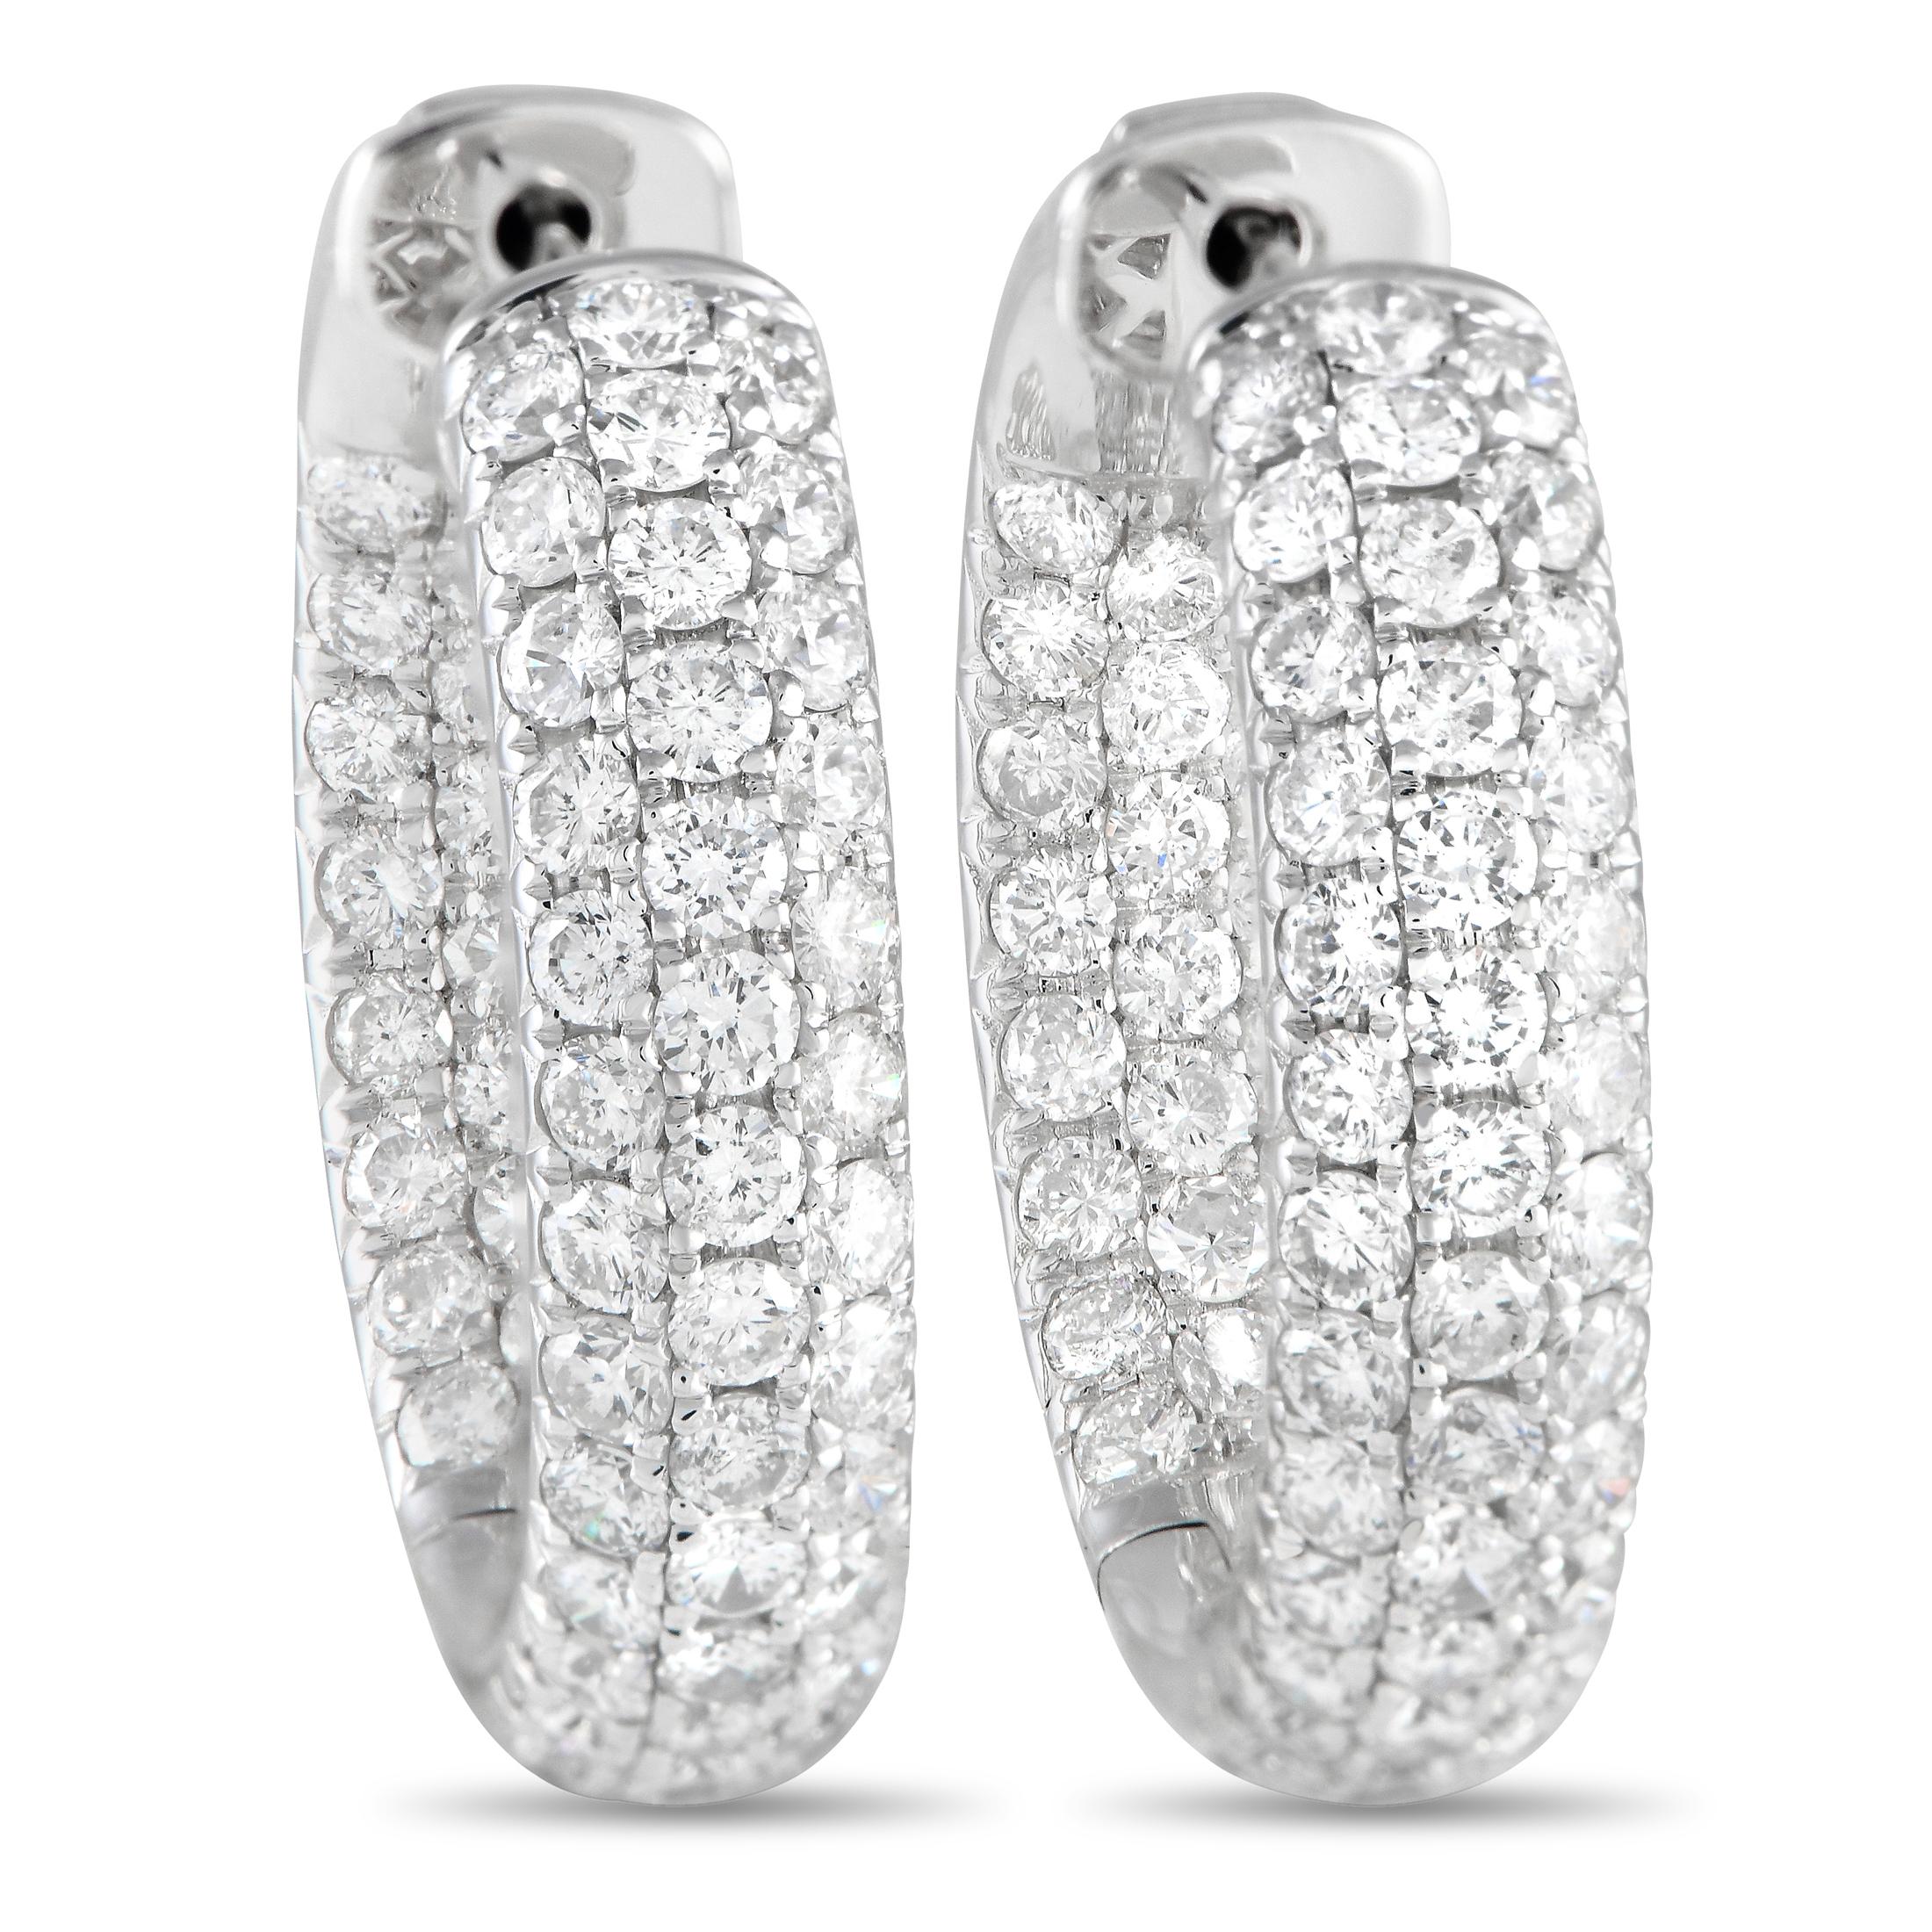 LB Exclusive 18k White Gold 3.05 Carat Diamond Inside-Out Hoop Earrings In New Condition For Sale In Southampton, PA